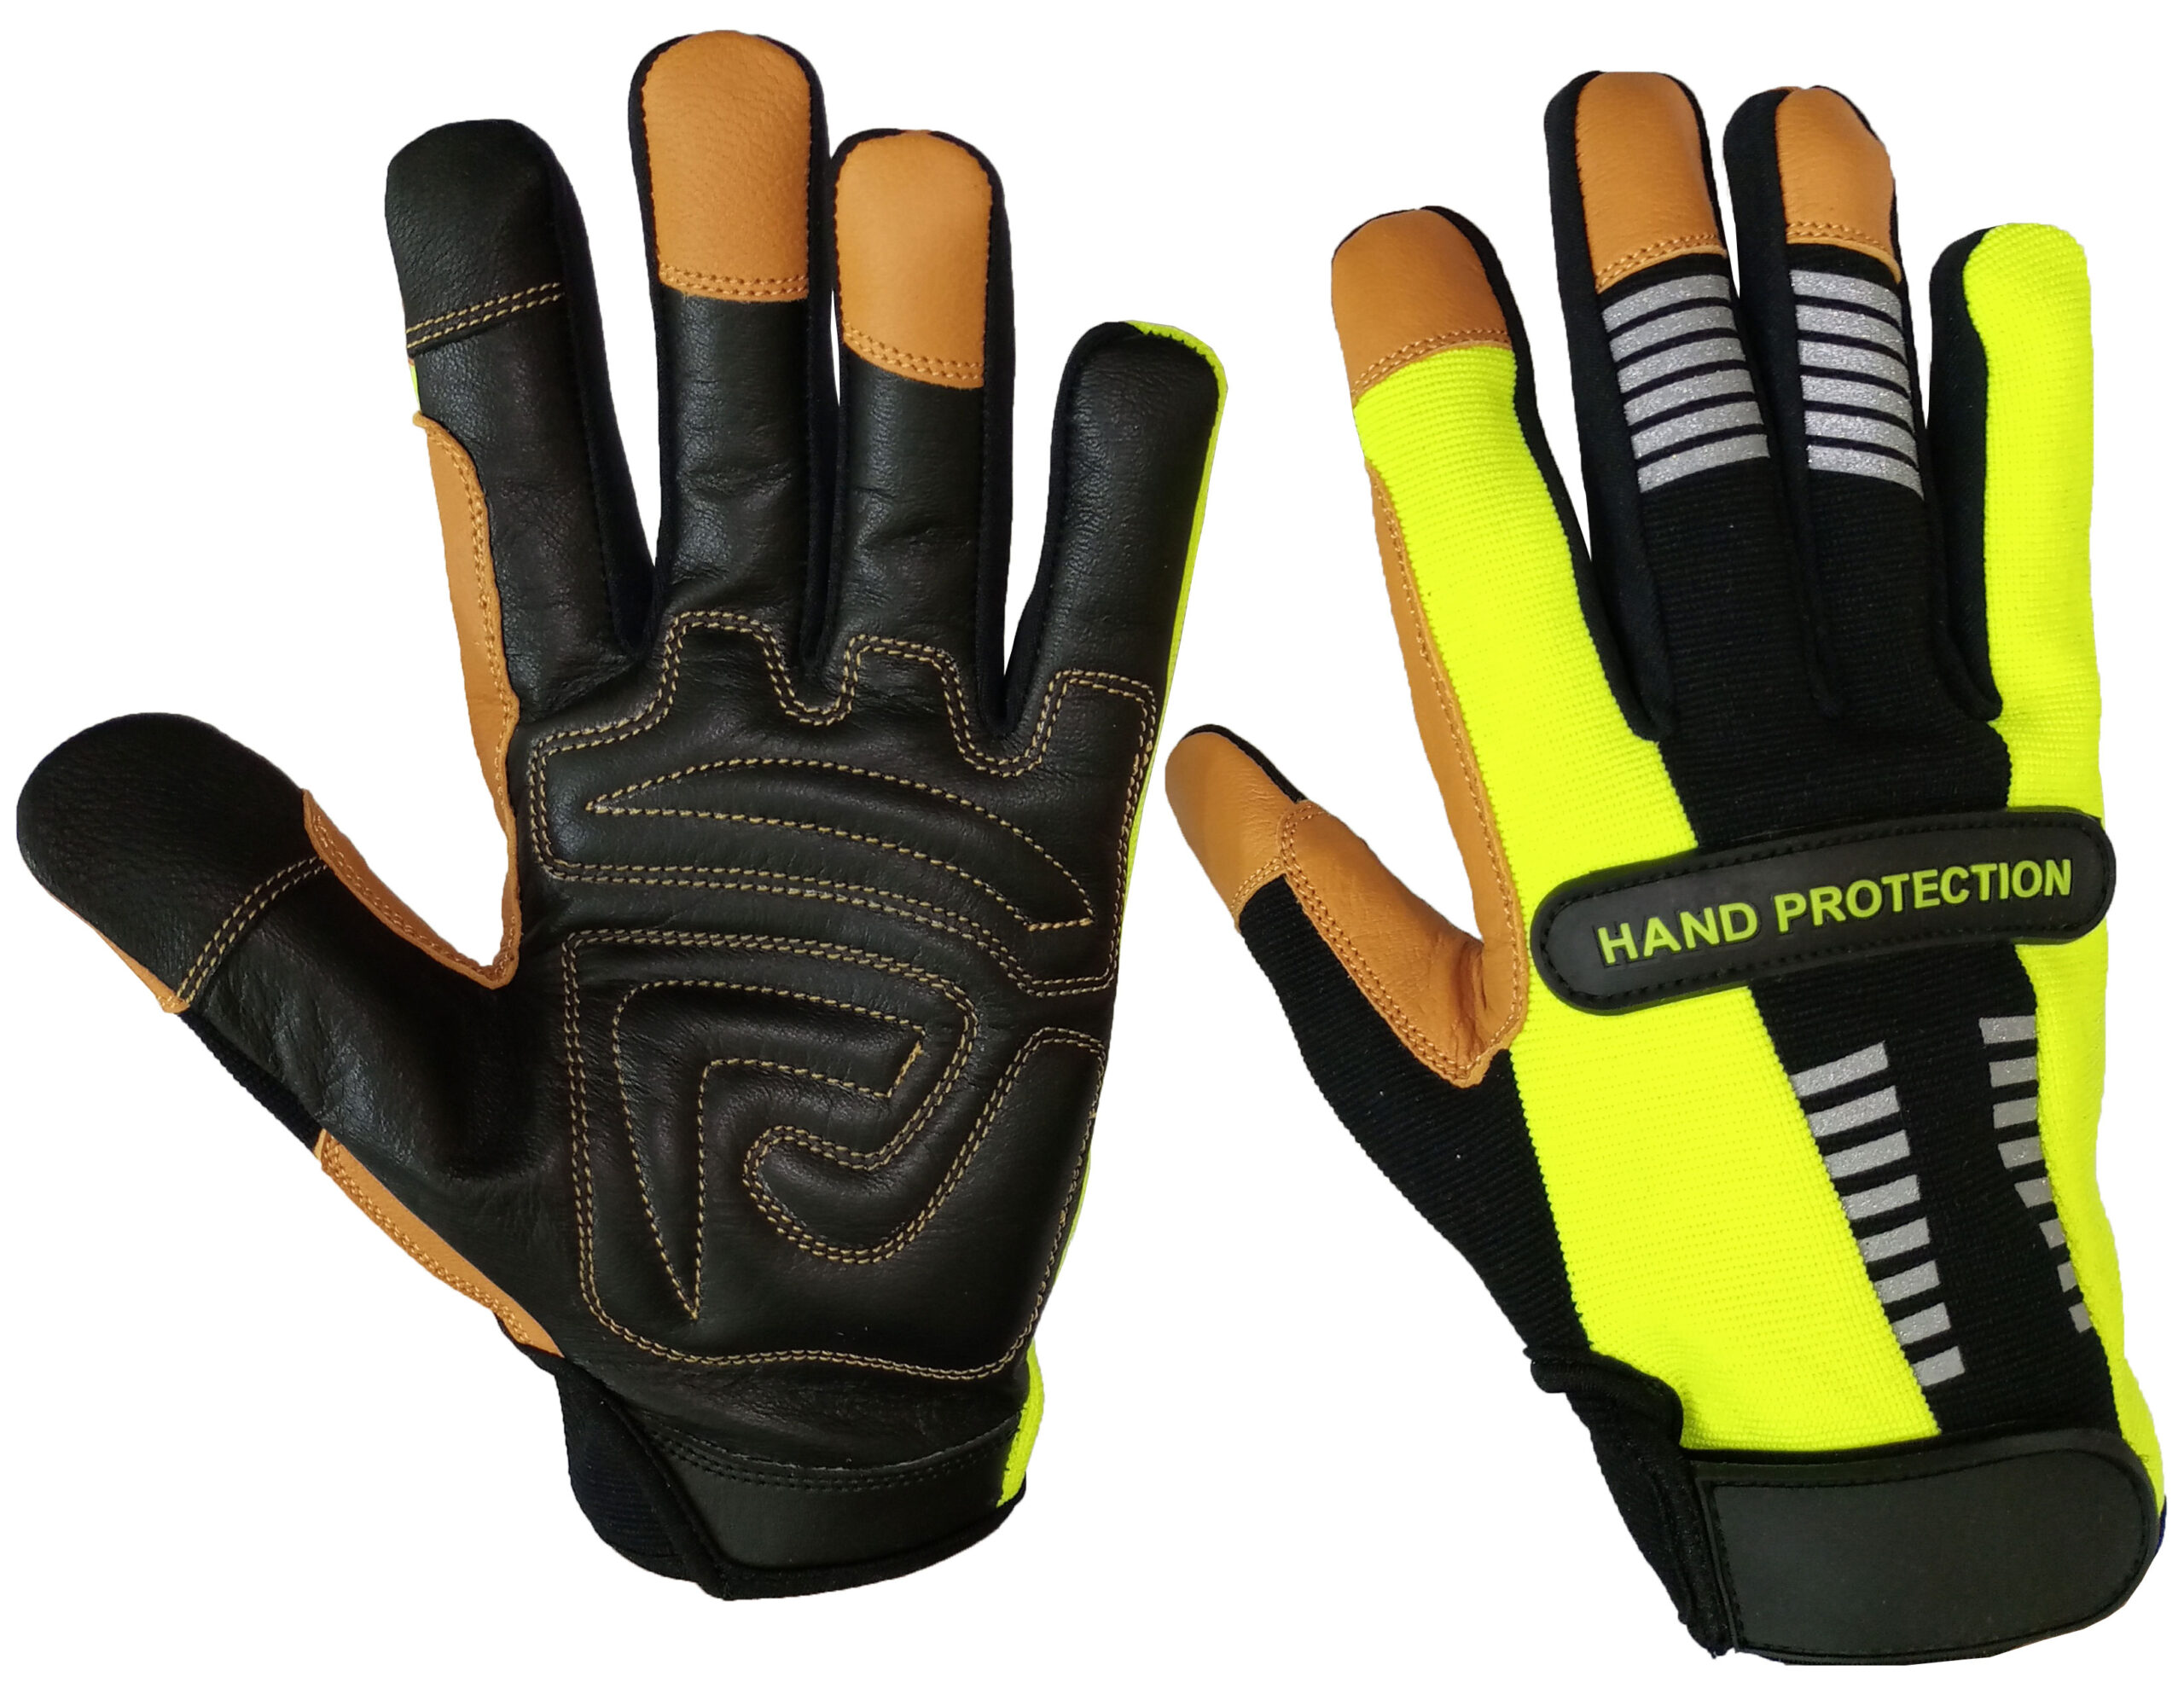 Mechanic Gloves in Goatskin Leather Safety Mechanical Touch Screen Gloves for work